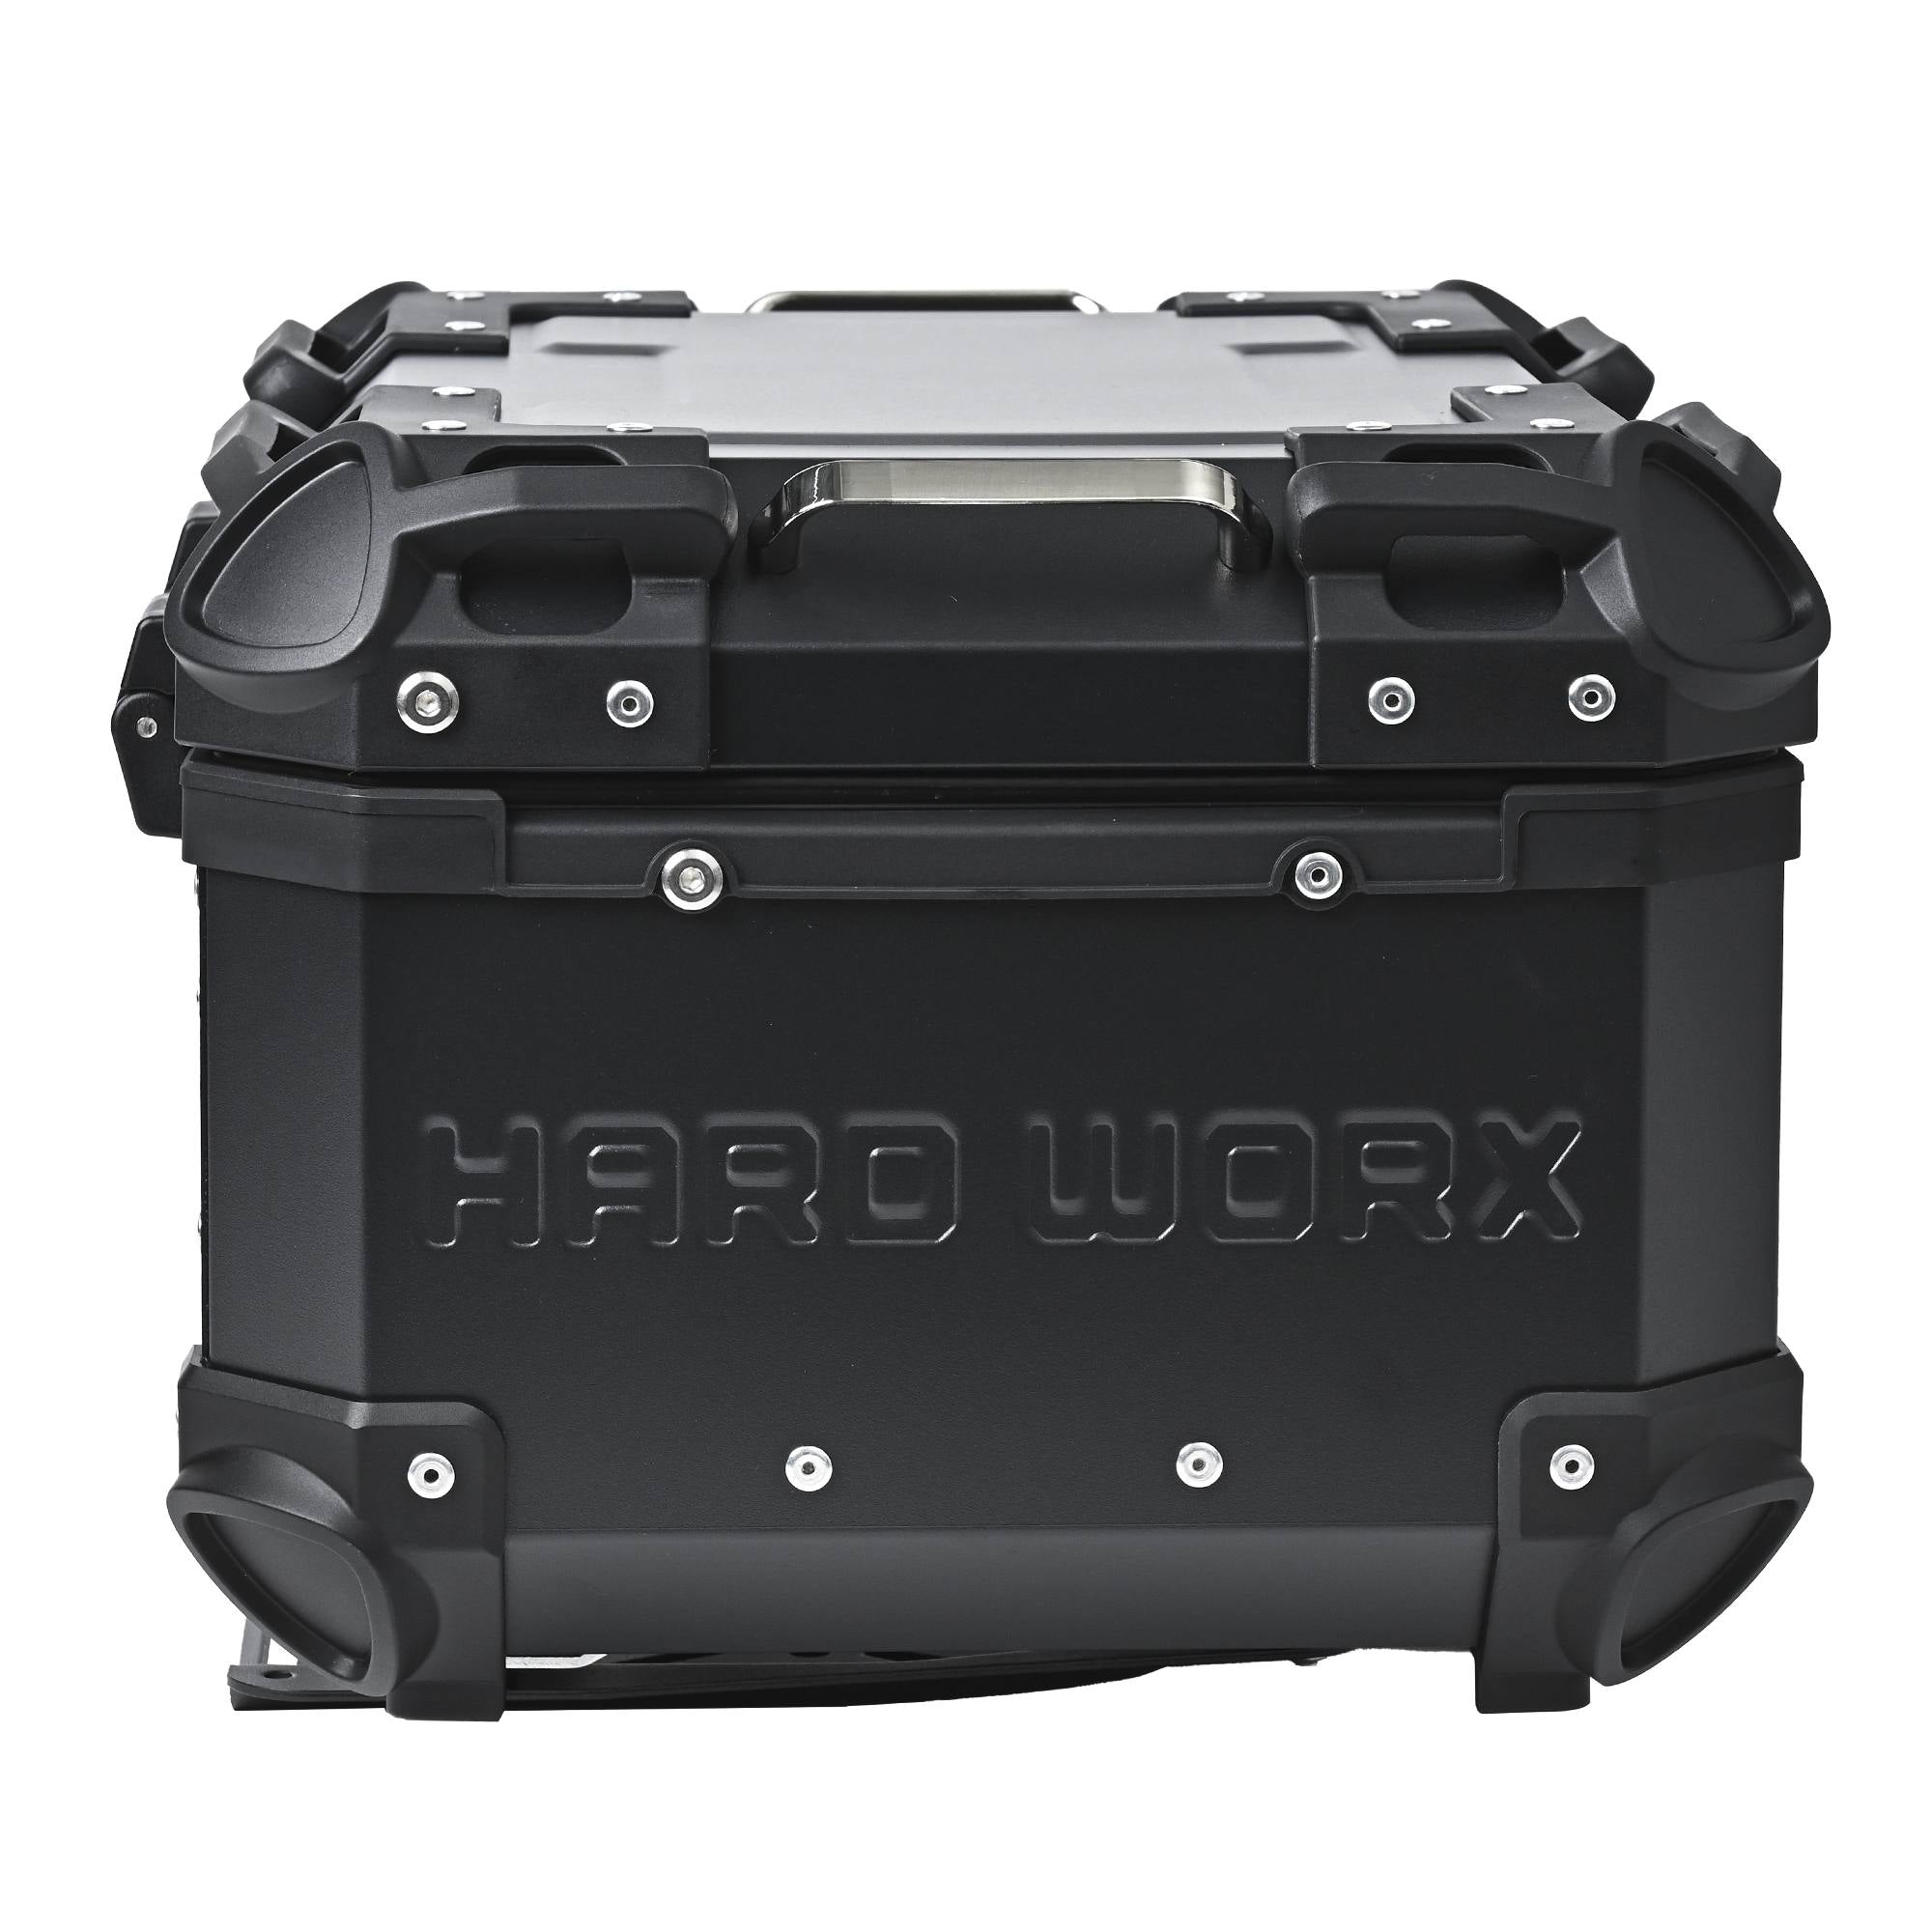 Beyond mobility. Aluminum top case for motorcycle HARD WORX Hard